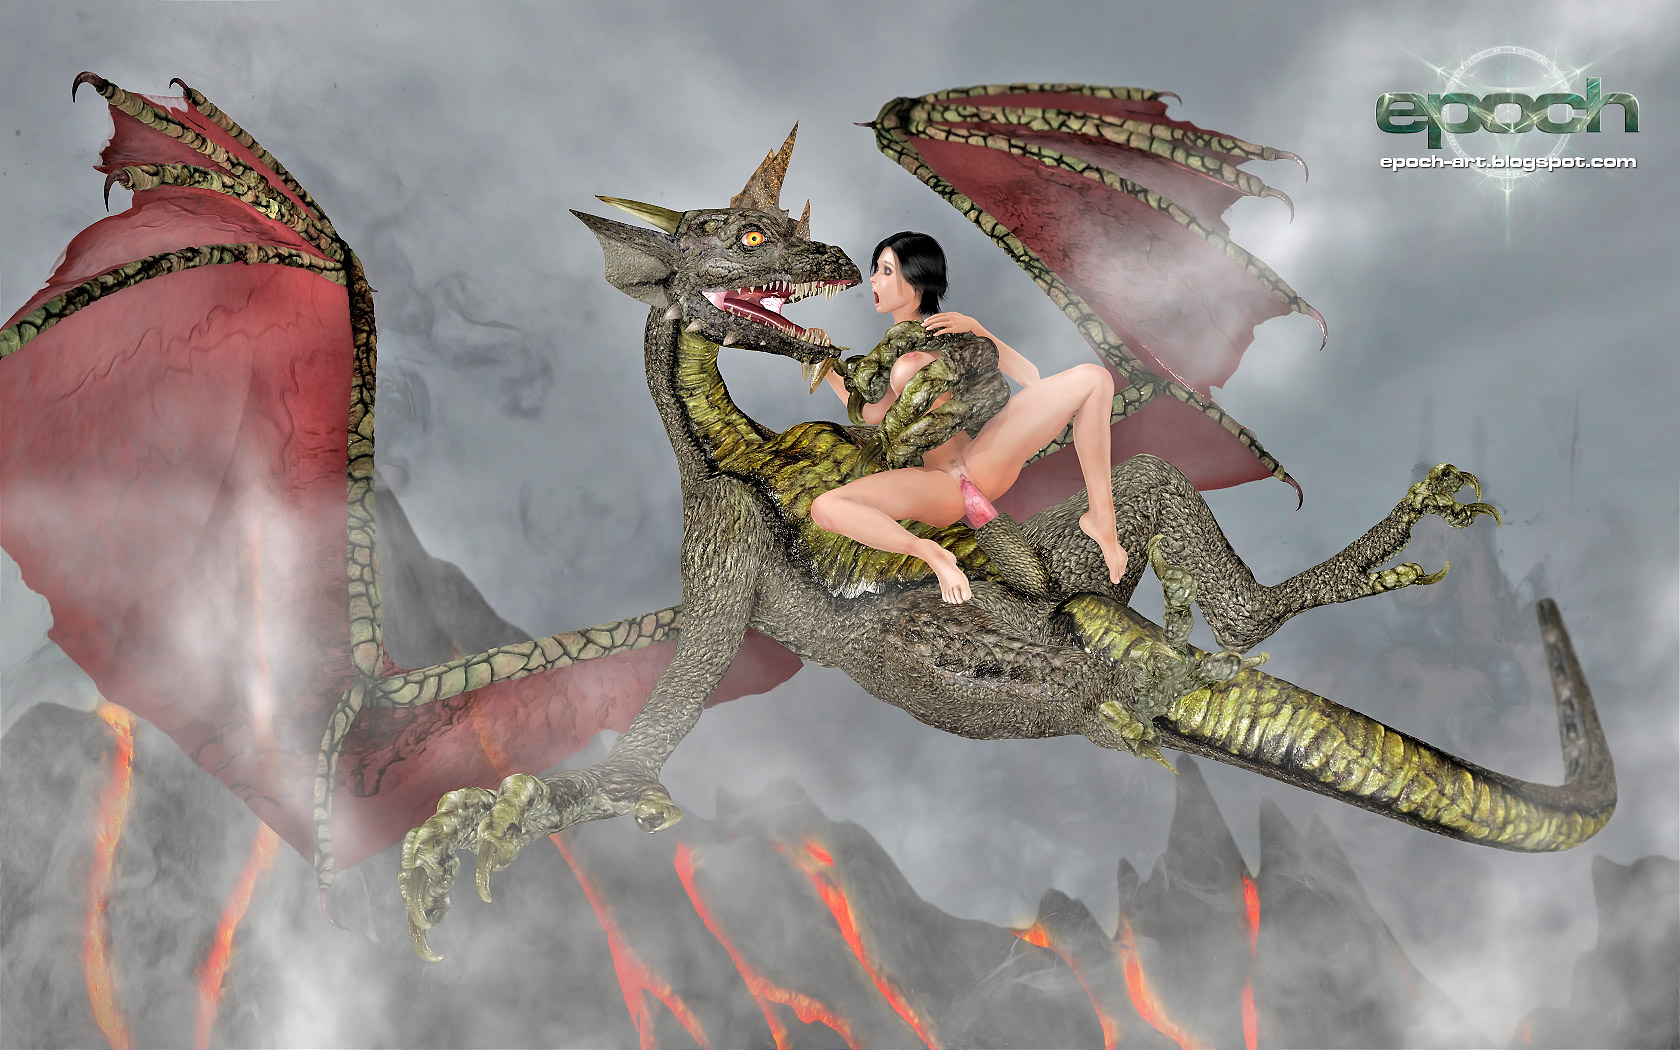 Mythical 3d Porn - Dark haired hottie brutally raped by a dragon | KingdomOfEvil 3d